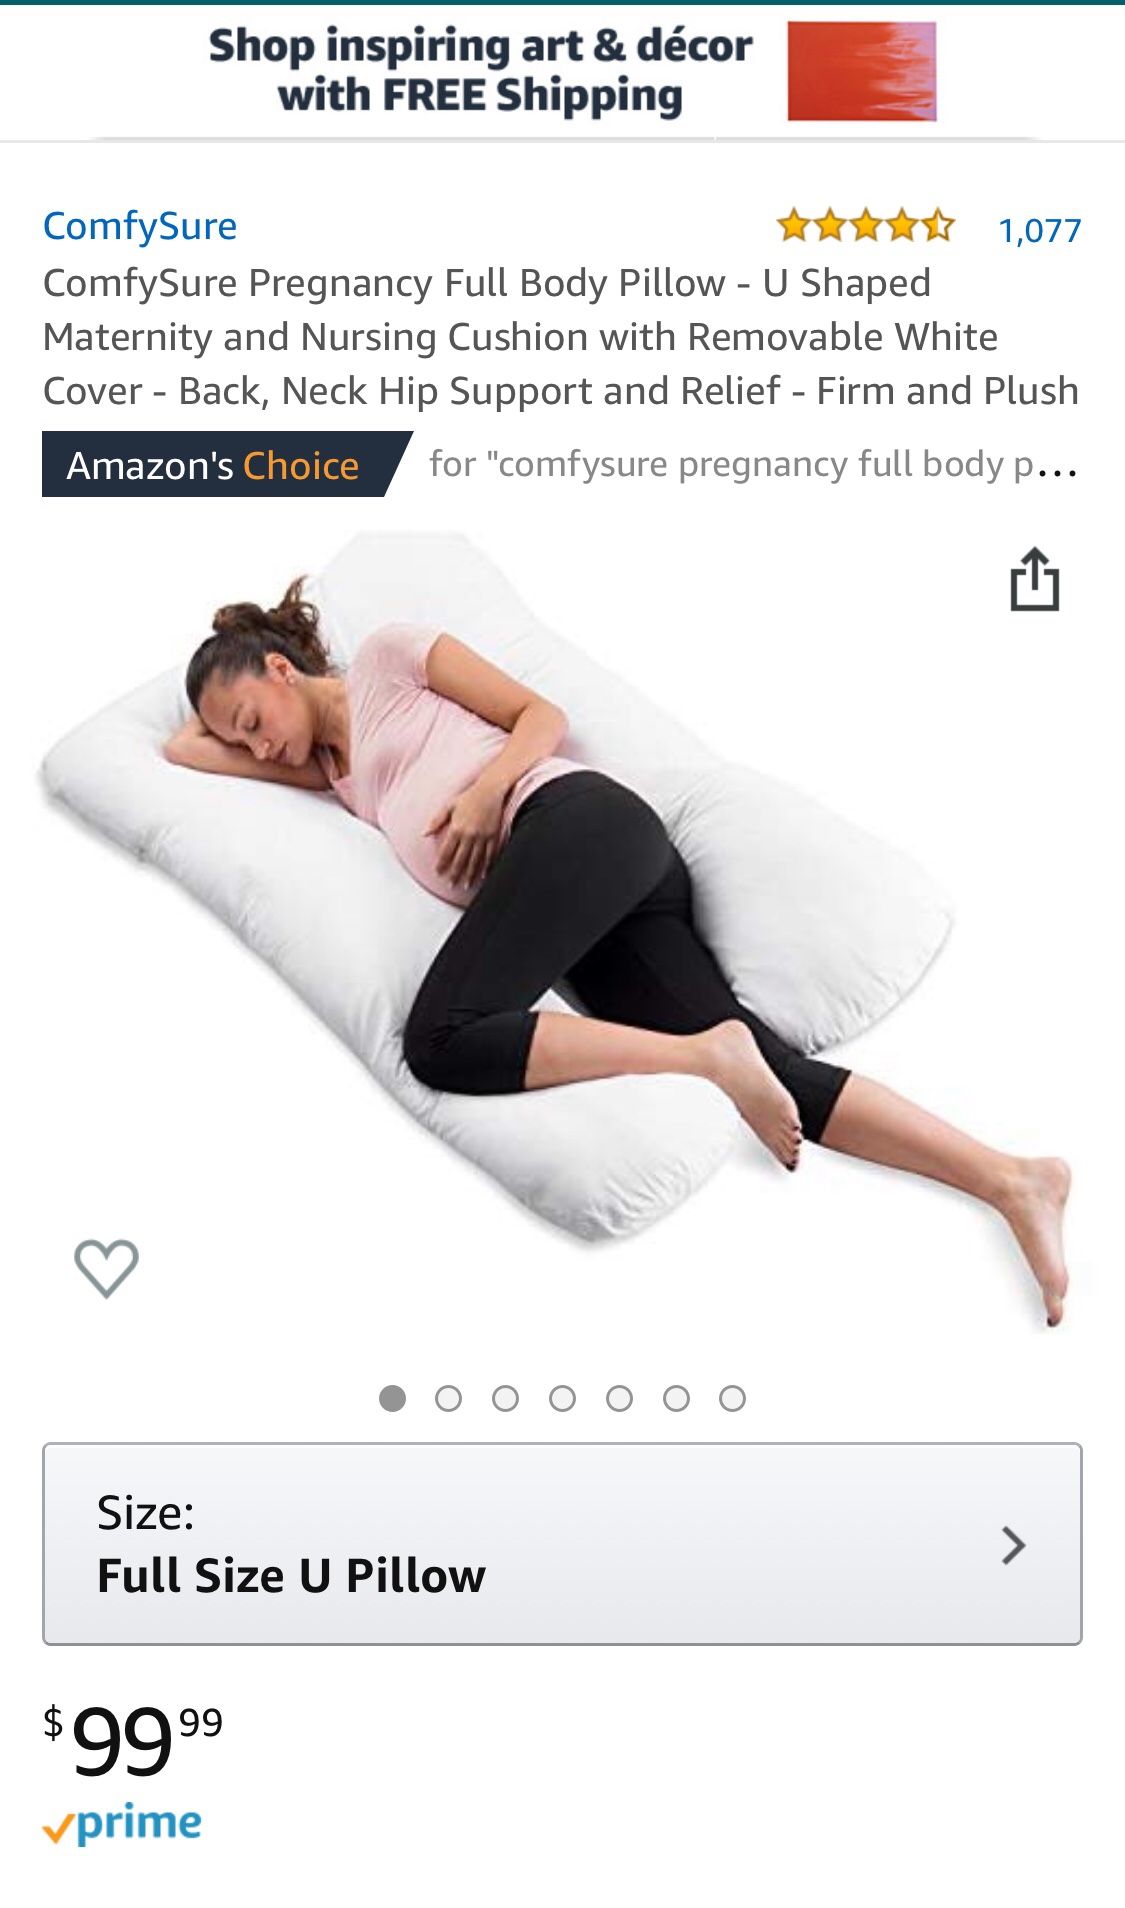 ComfySure Pregnancy Full Body Pillow - U Shaped Maternity and Nursing Cushion with Removable White Cover - Back, Neck Hip Support and Relief - Firm a